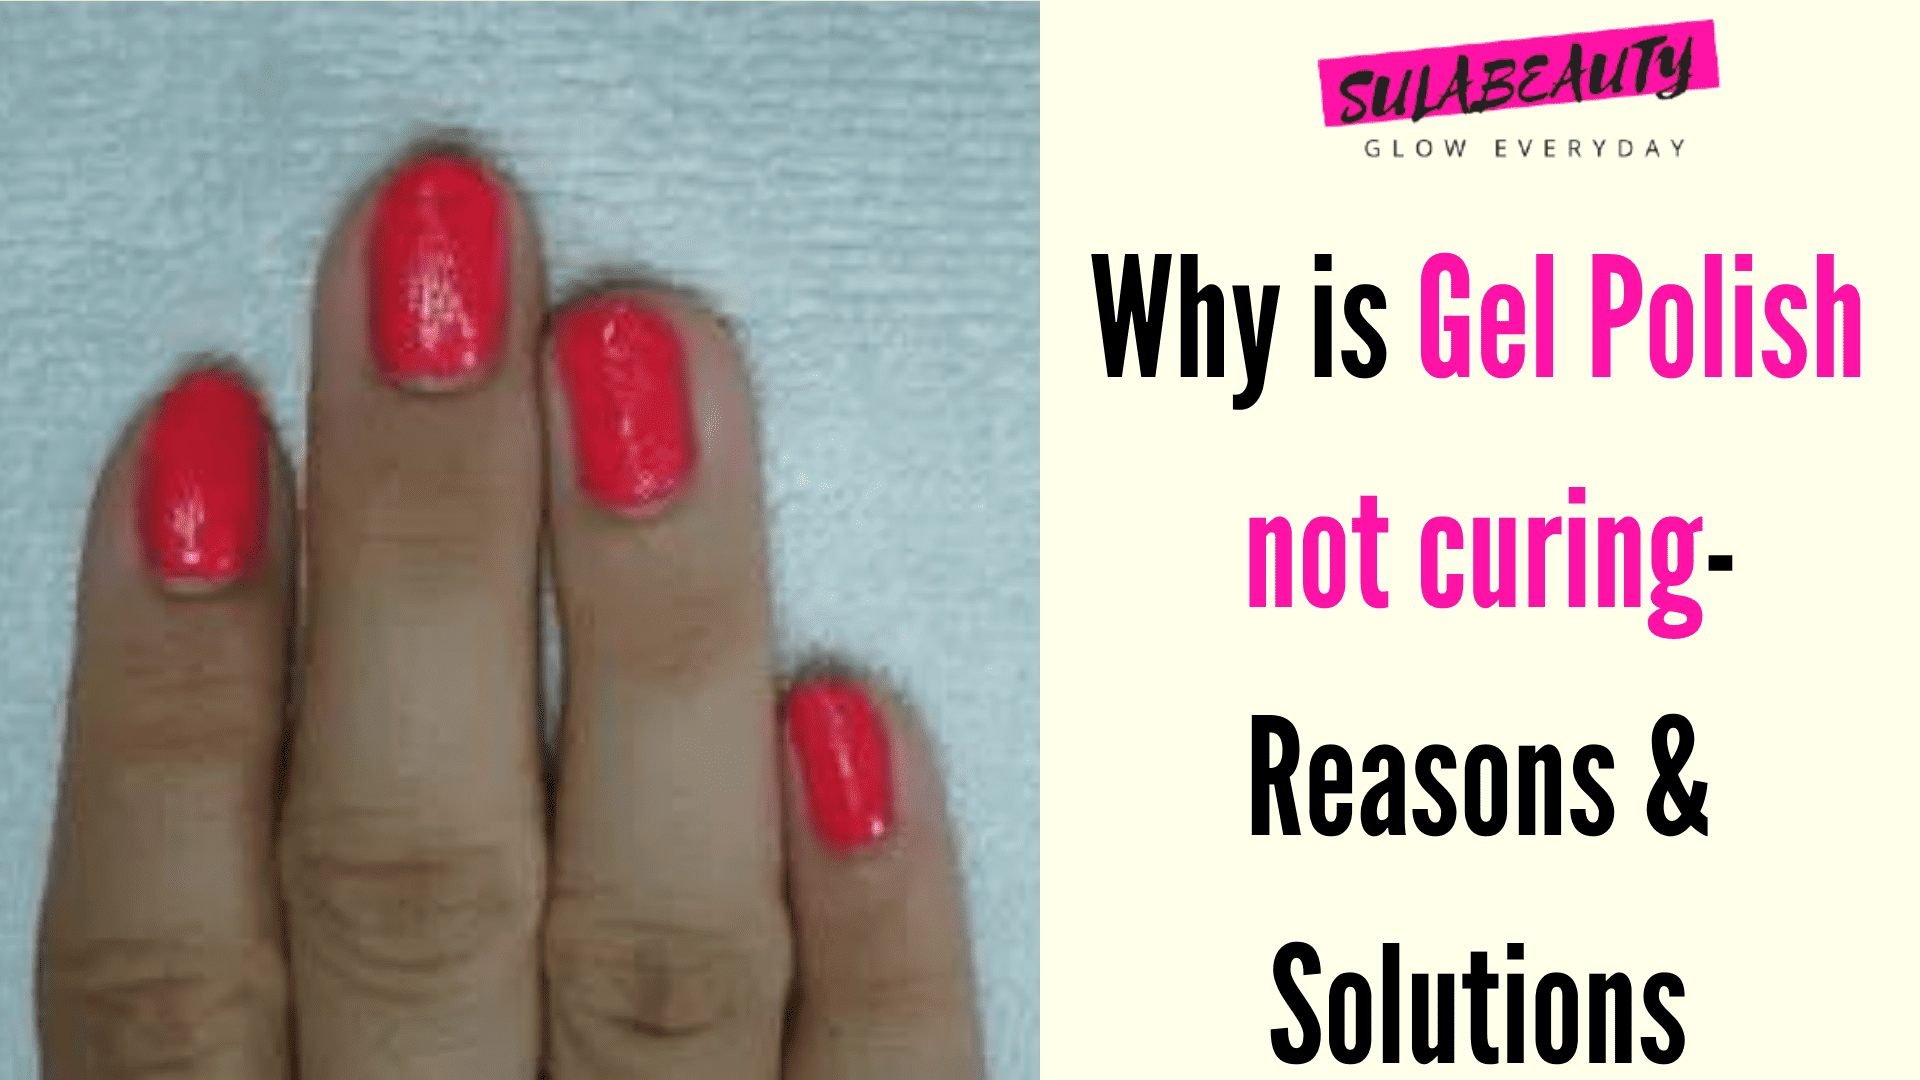 Why is Gel Polish Not Curing - Reasons & Solutions! - Sula Beauty